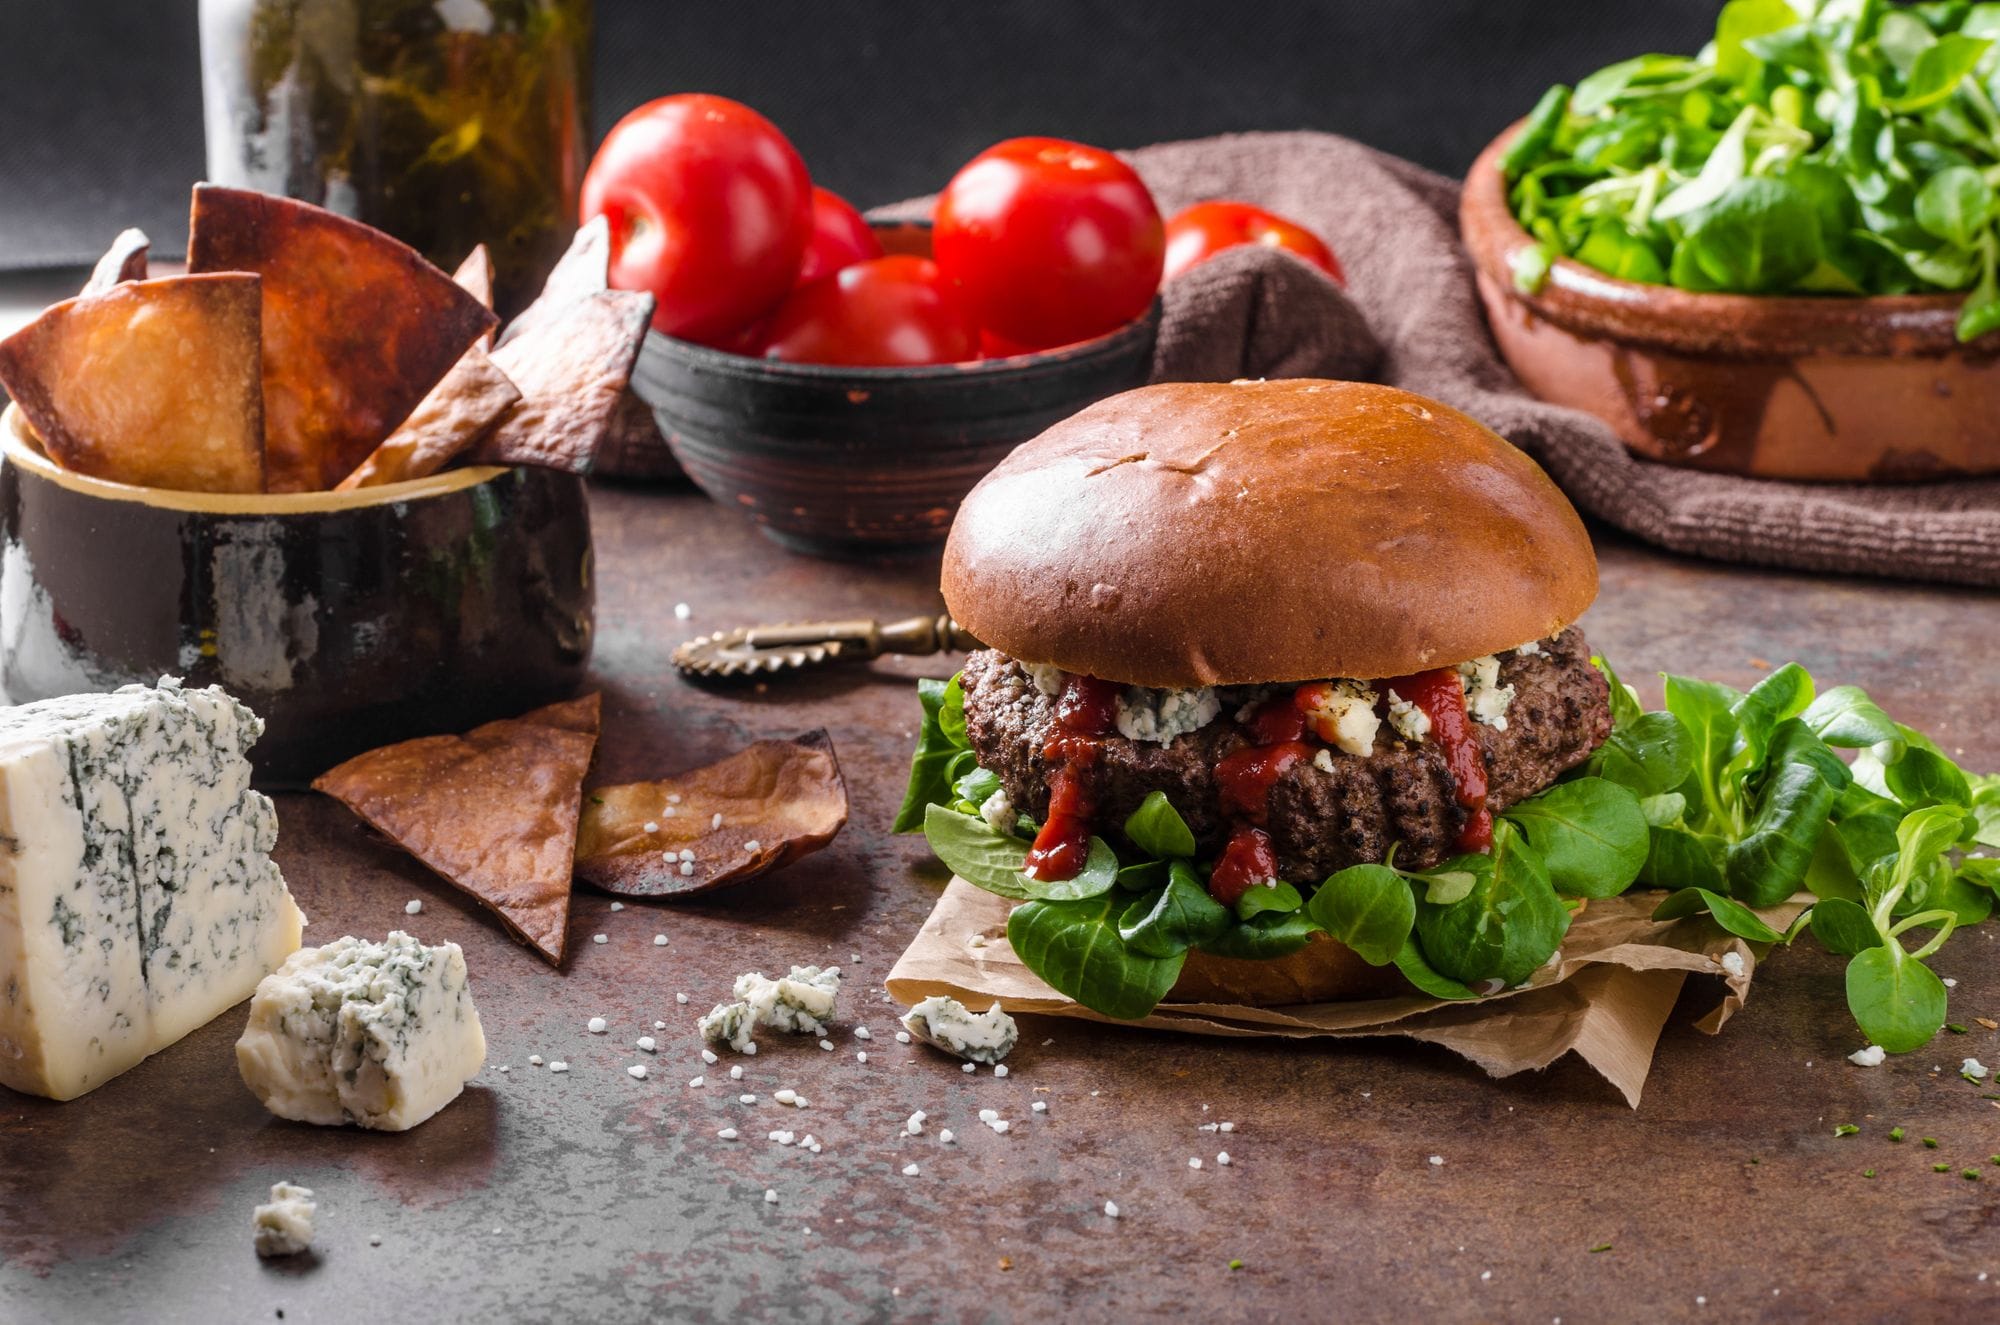 Spiced Lamb Burger with Red Onion Marmalade